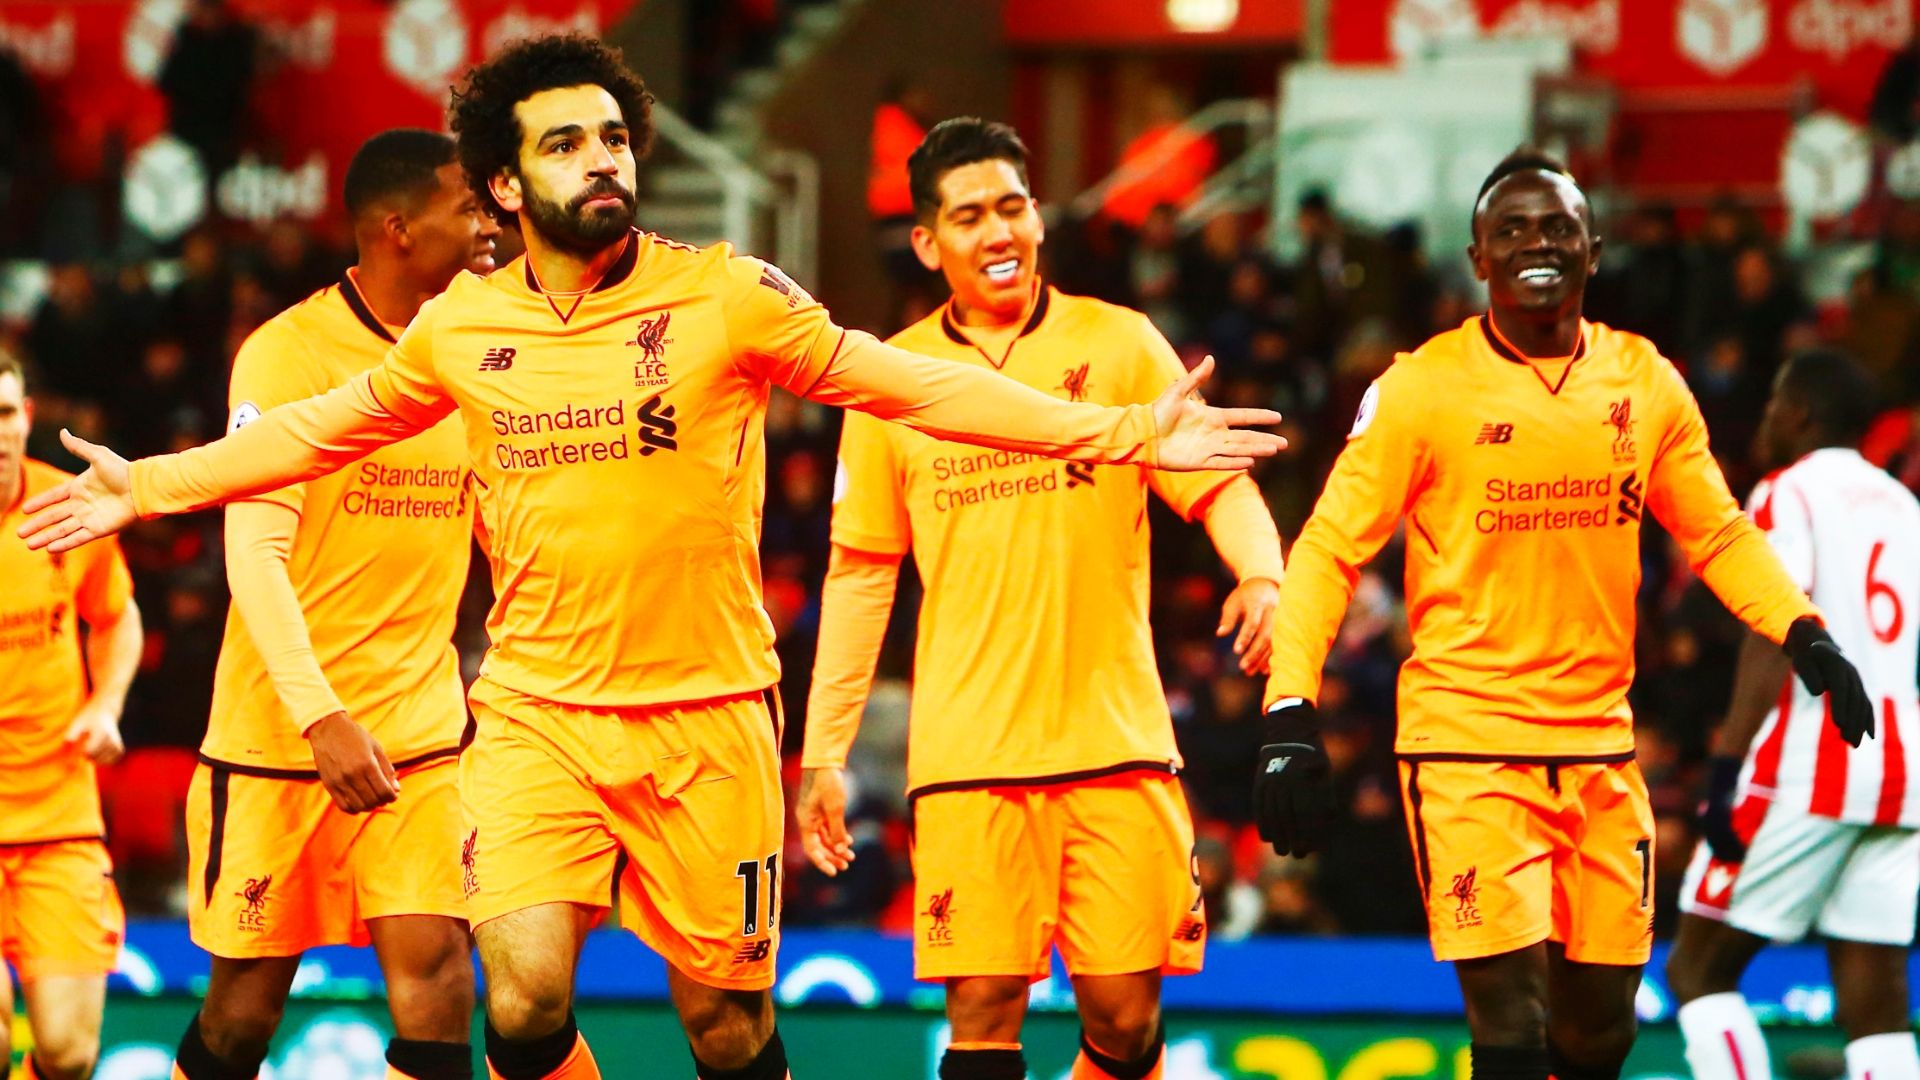 Liverpool get efficient but controversial win